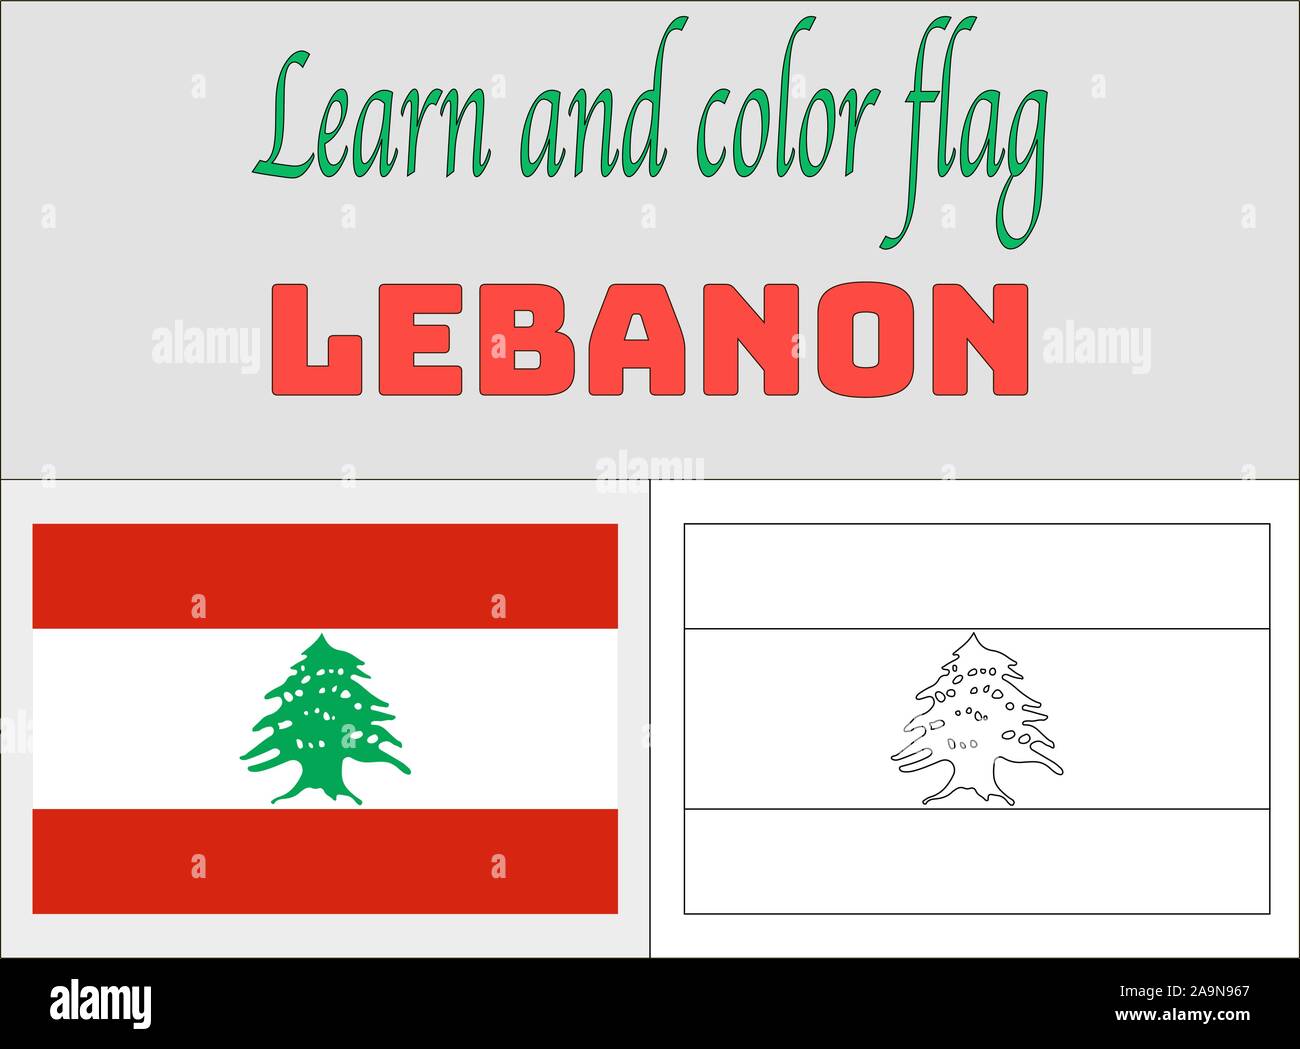 lebanon-national-flag-coloring-book-pages-for-education-and-learning